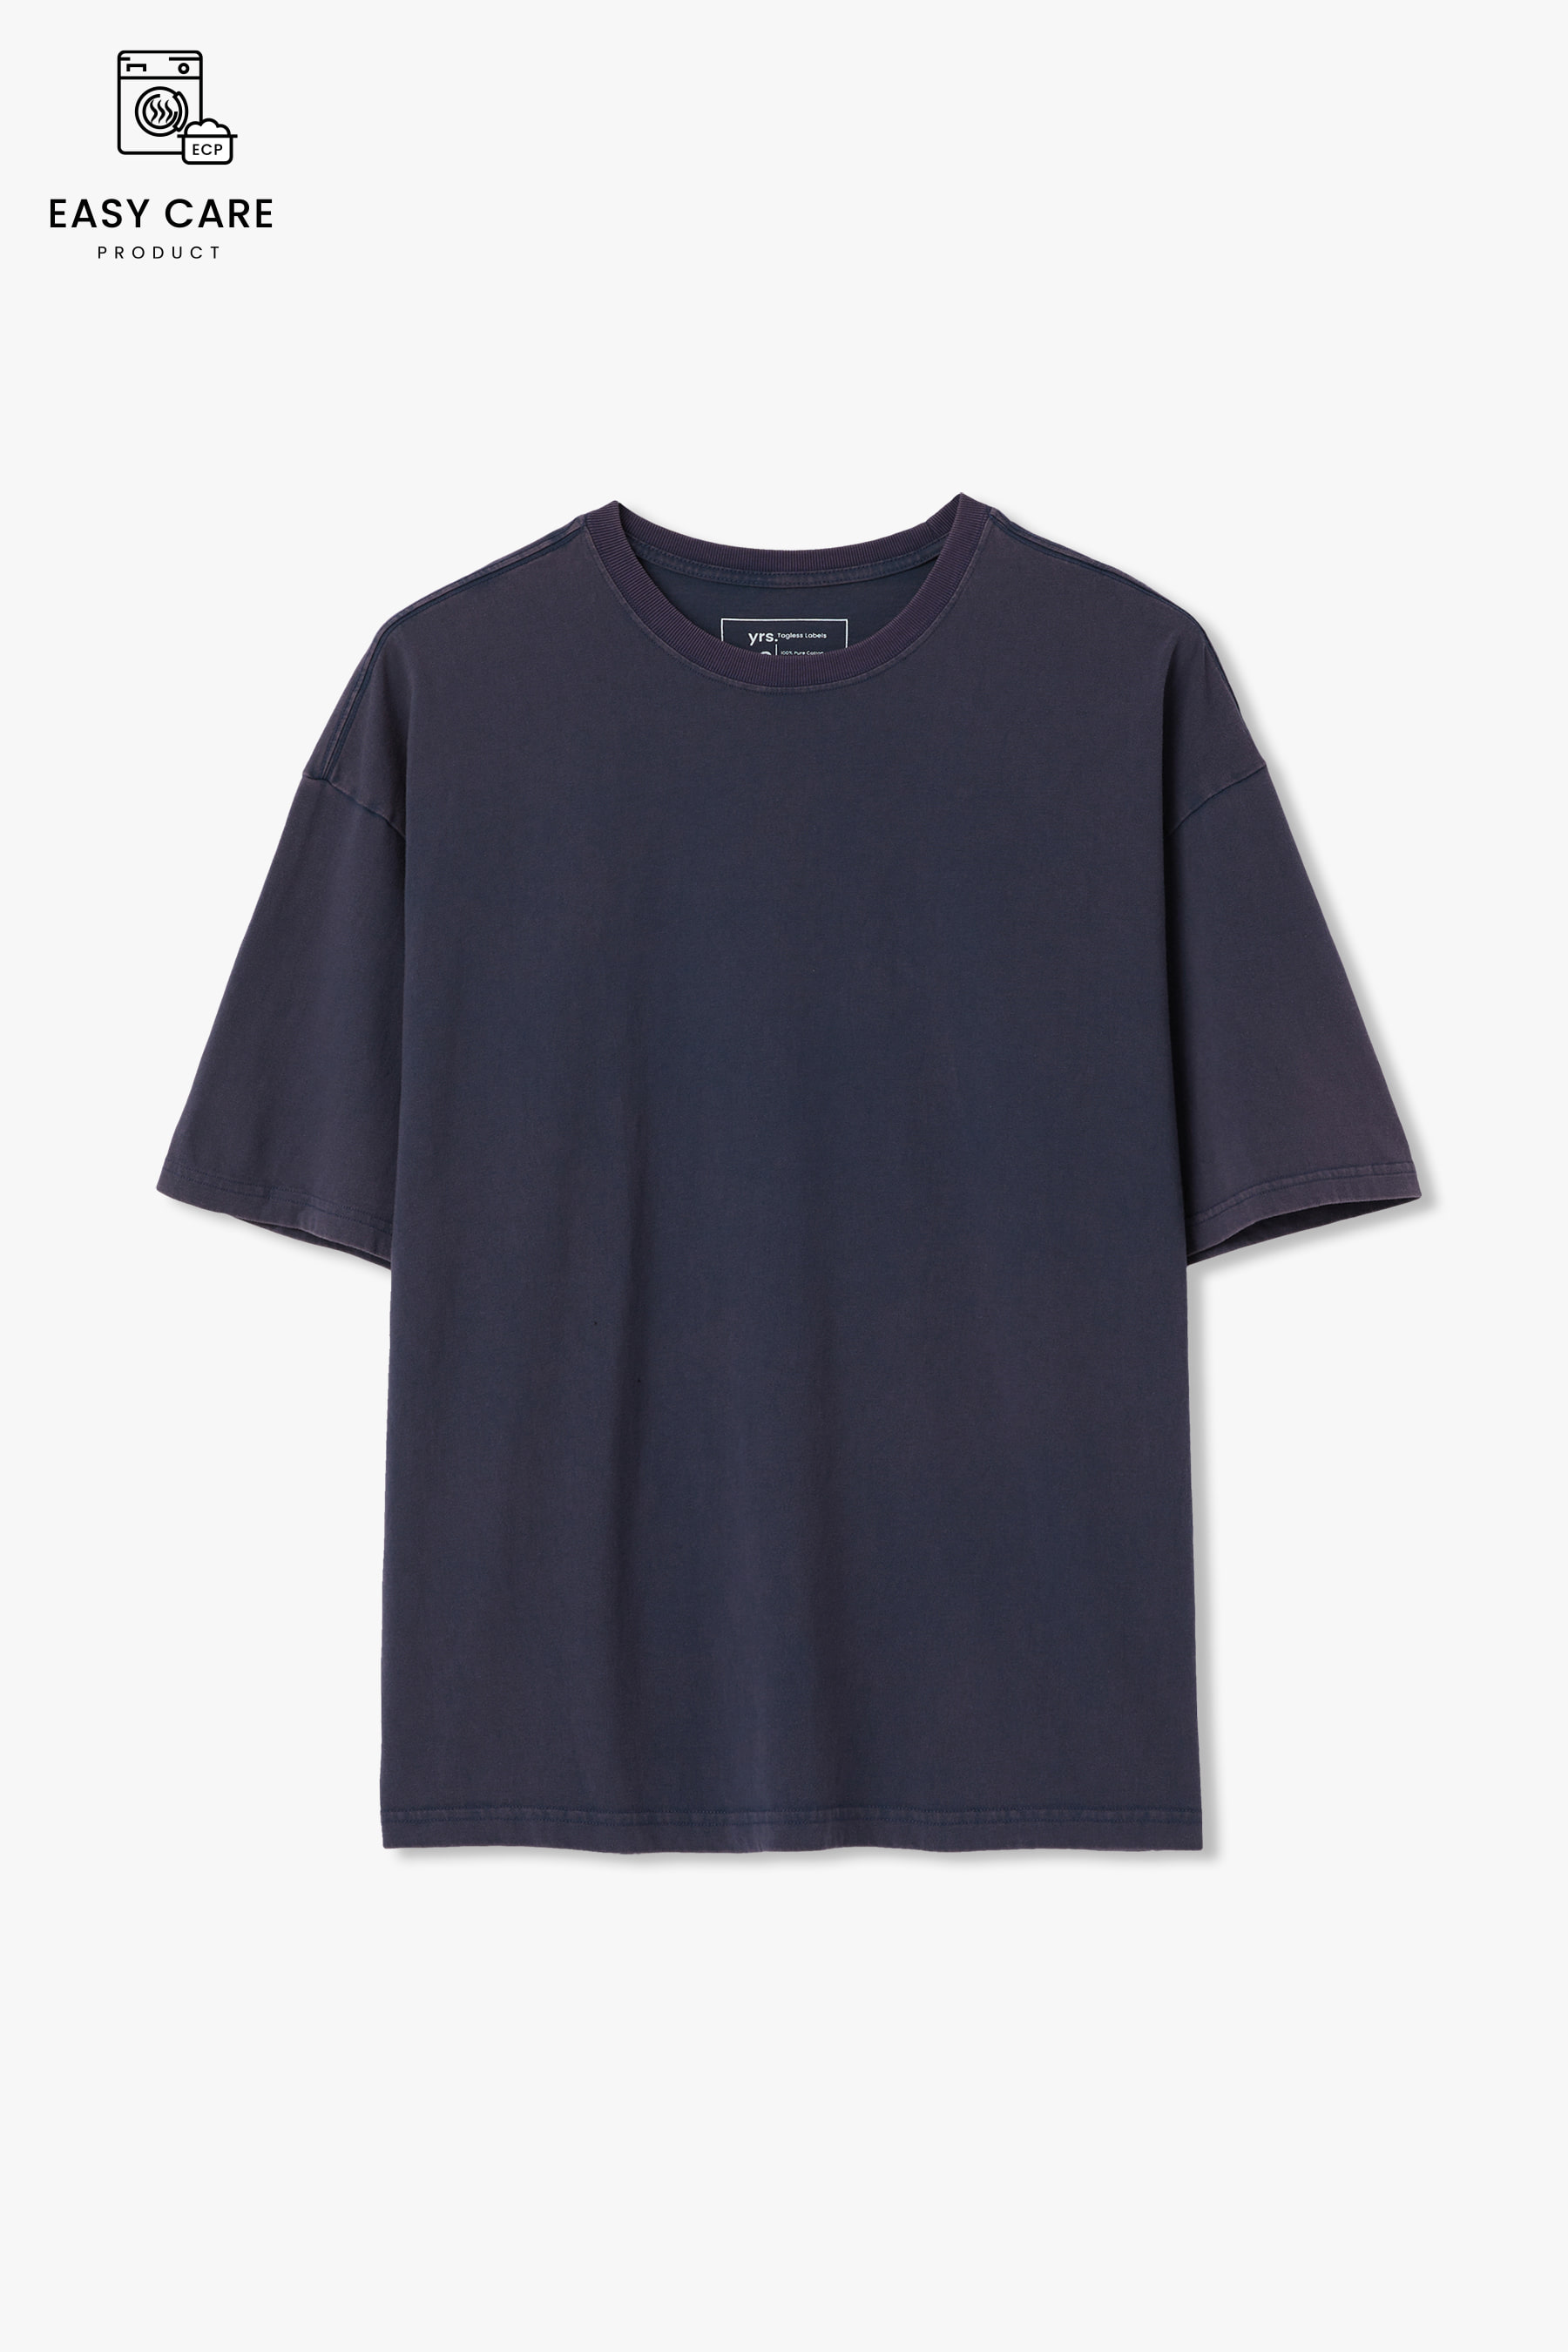 DUSTY NAVY YRS  WASHED COTTON KUVAIKA T (INNER TYPE, ECP GARMENT PROCESS)